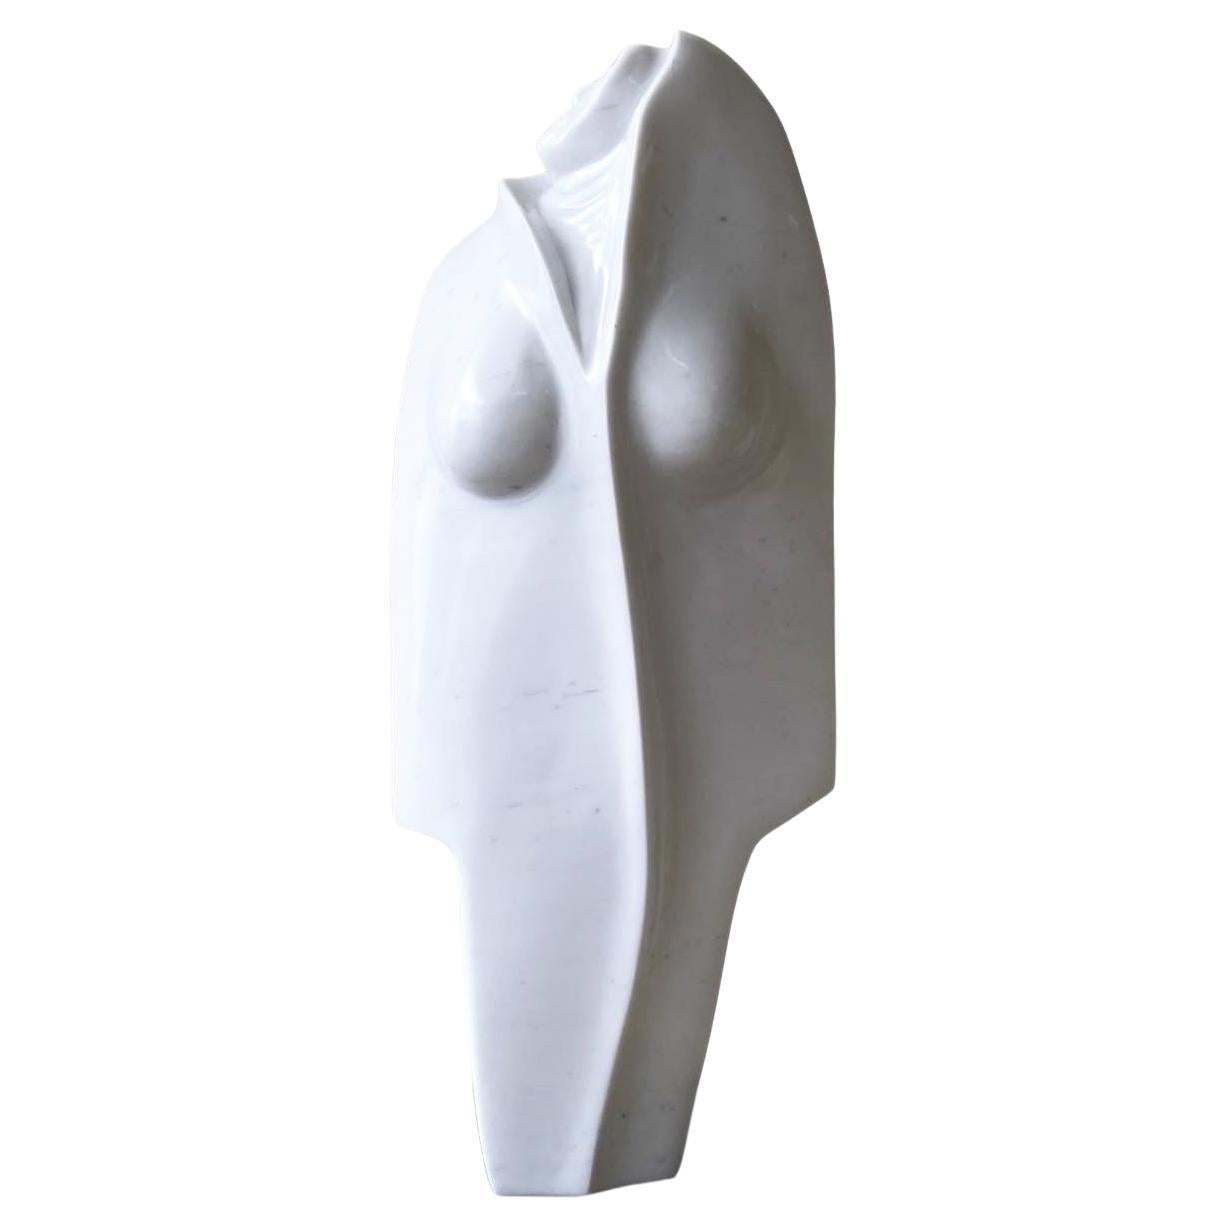 Postmodern Woman in White Marble Sculpture on Metal Pedestal - 2 Pieces For Sale